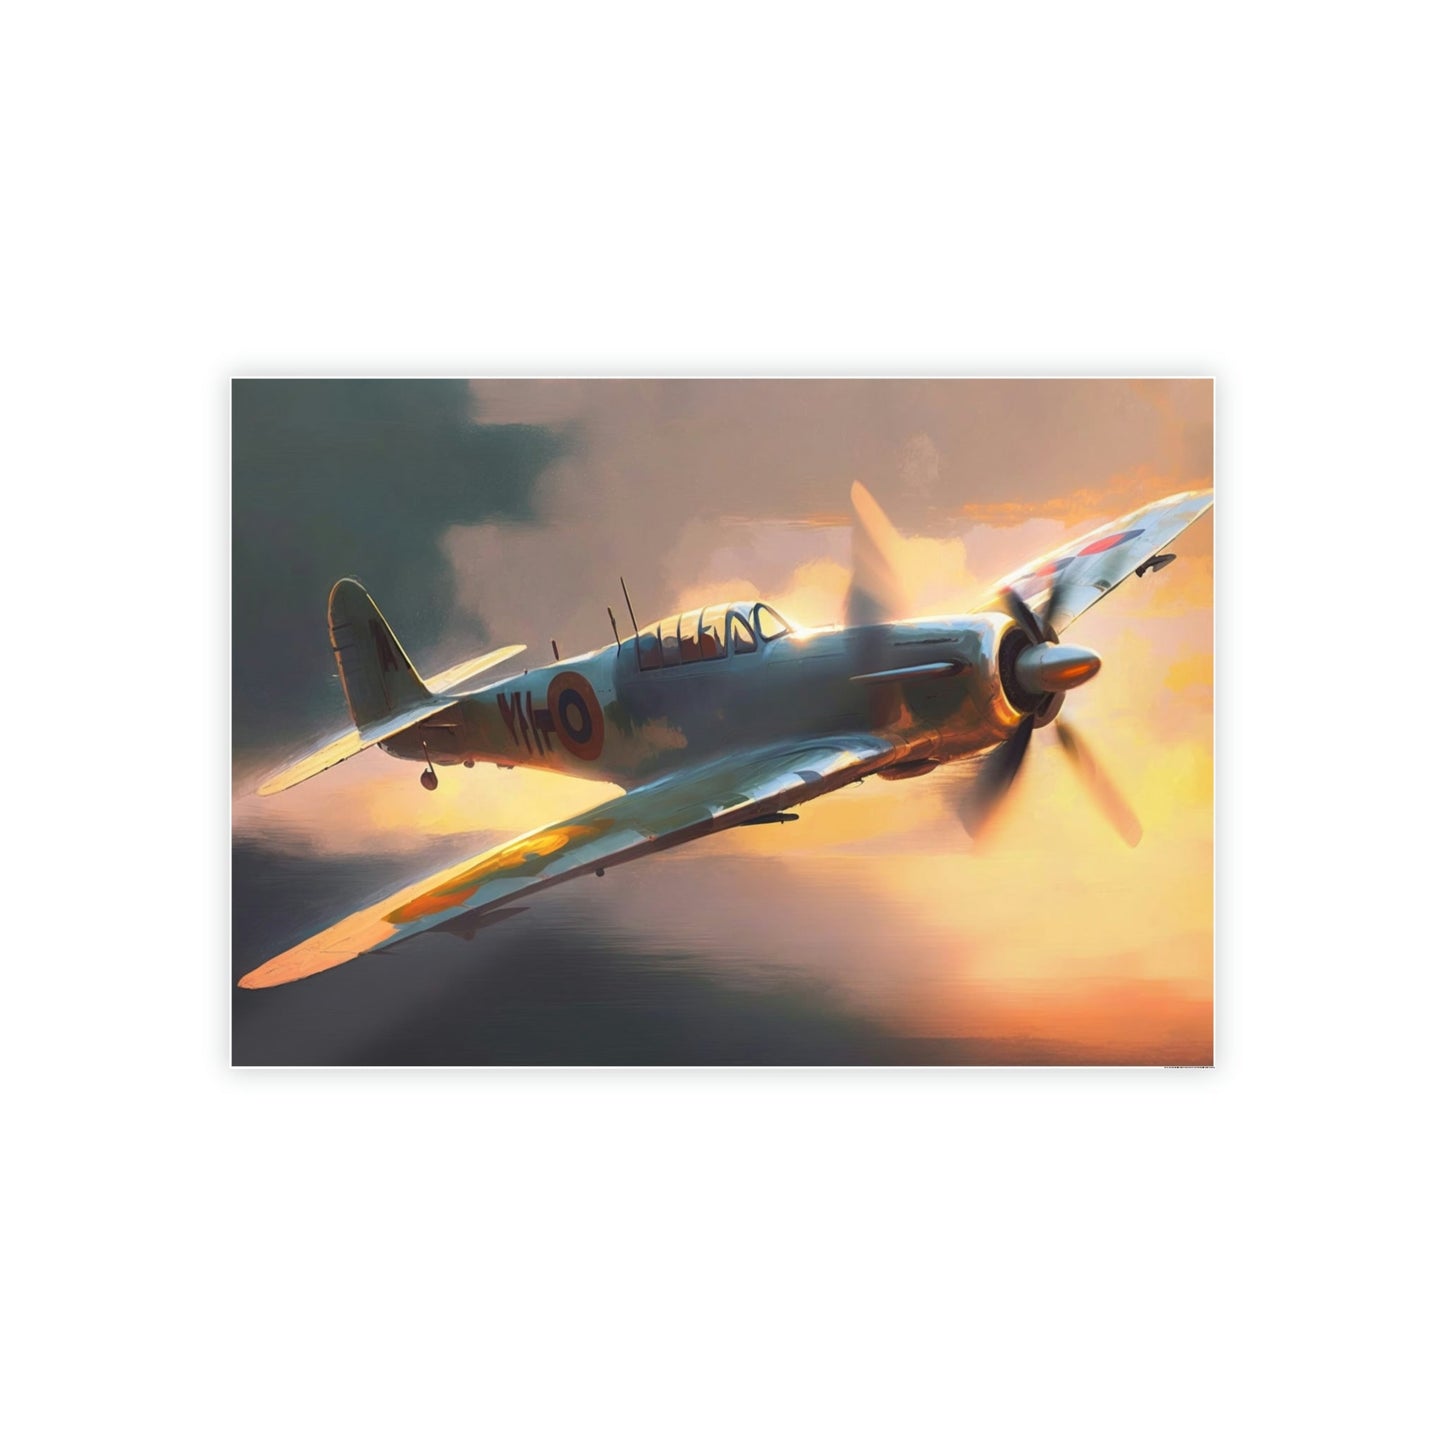 Flying High: Stunning Canvas Print of Aircraft in Action